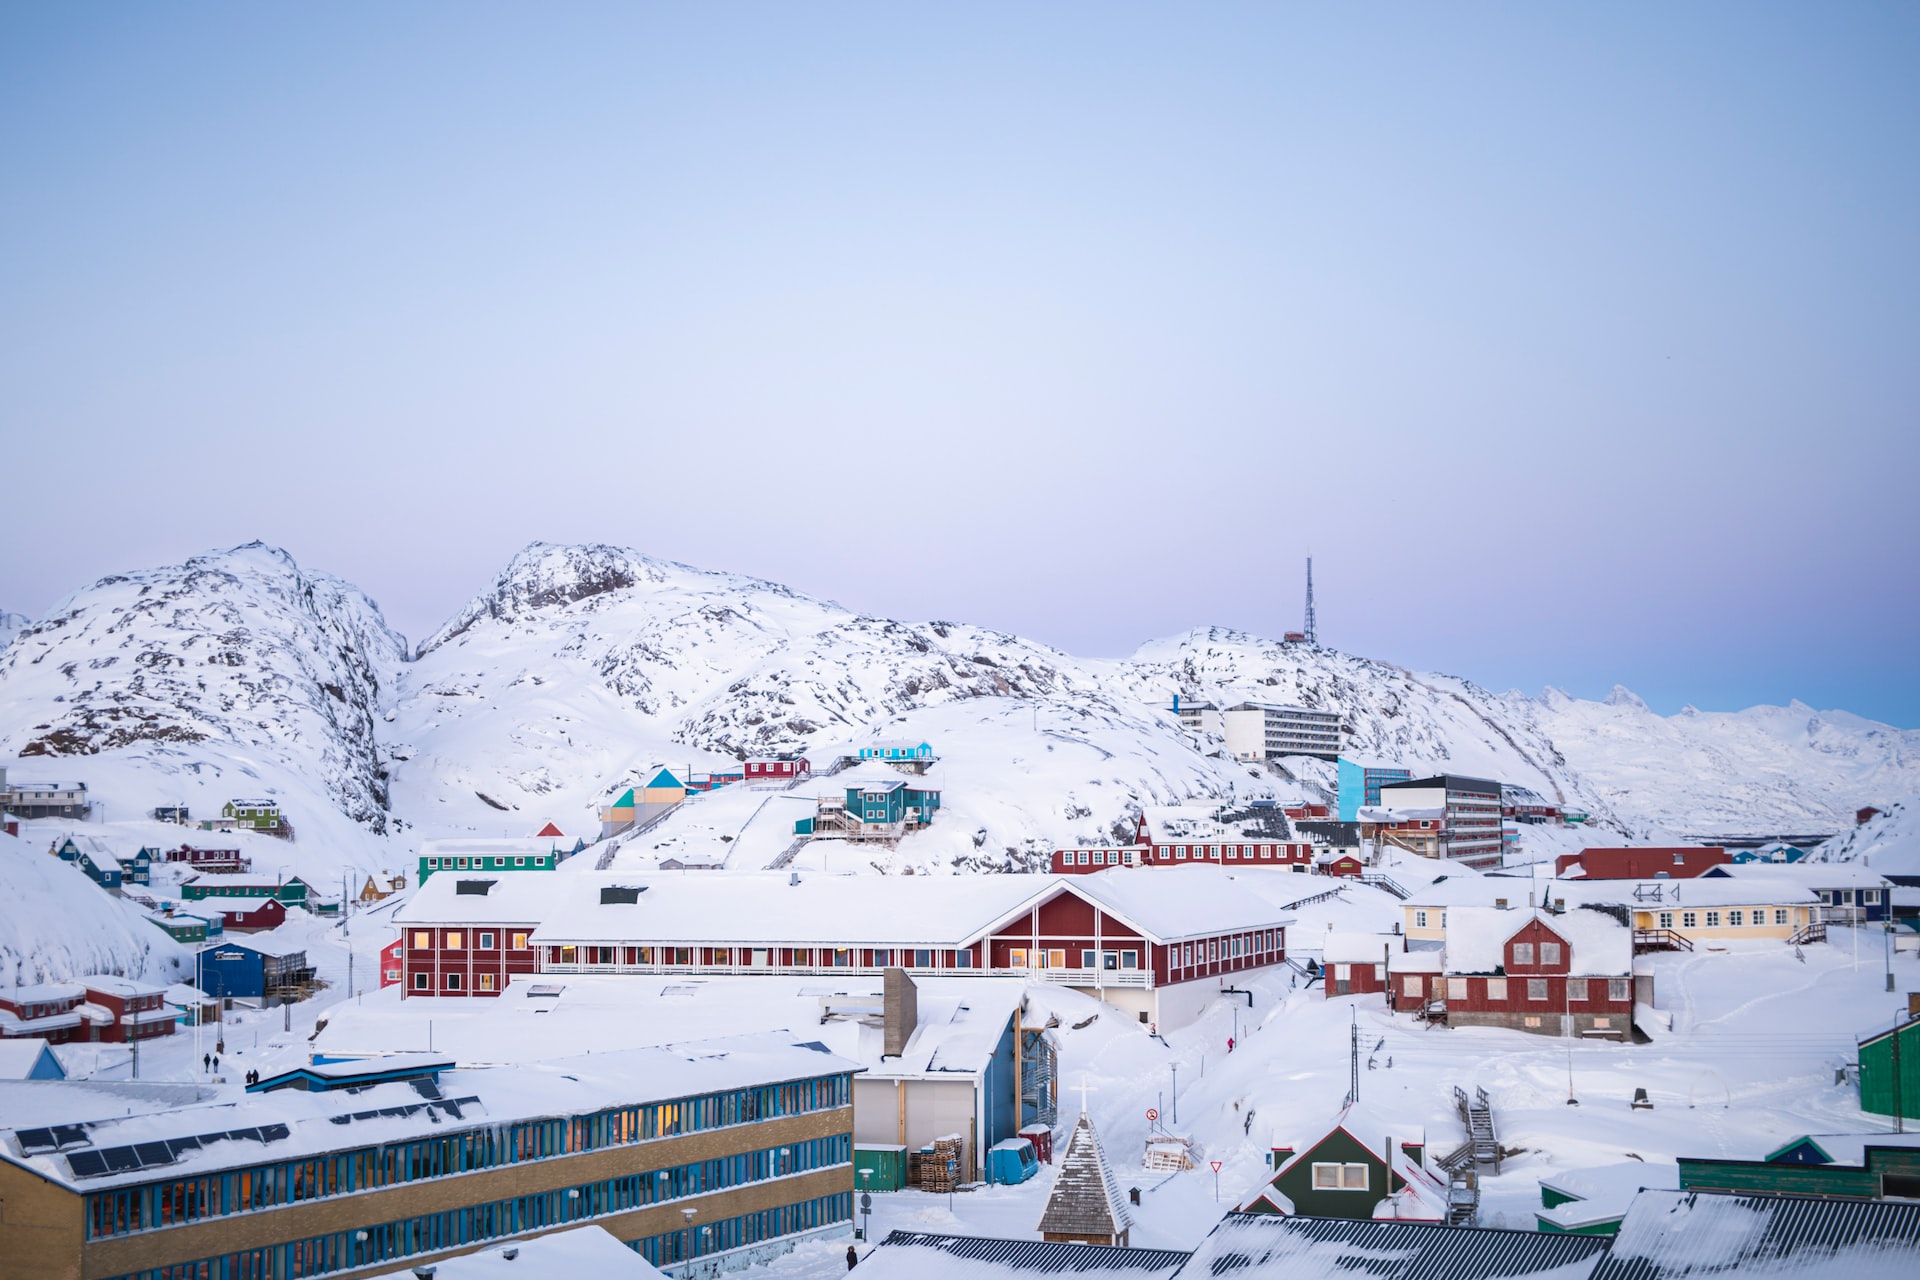 The snowy, freezing Greenland could be you awesome winter getaway!
